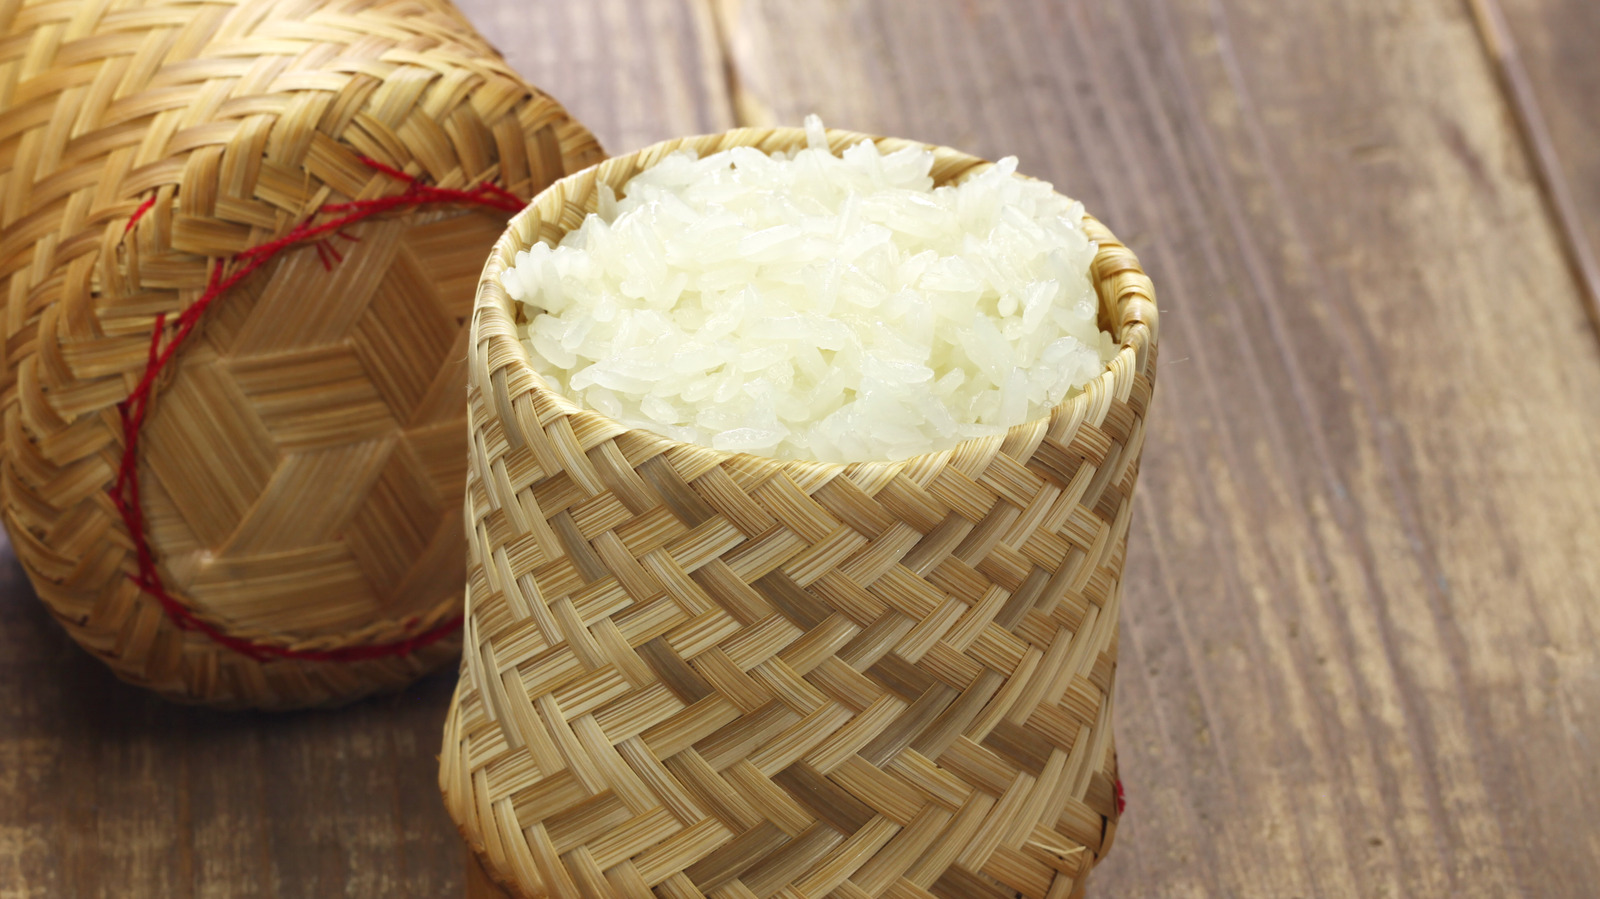 How to Cook Thai/Lao Sticky Rice without a Steamer